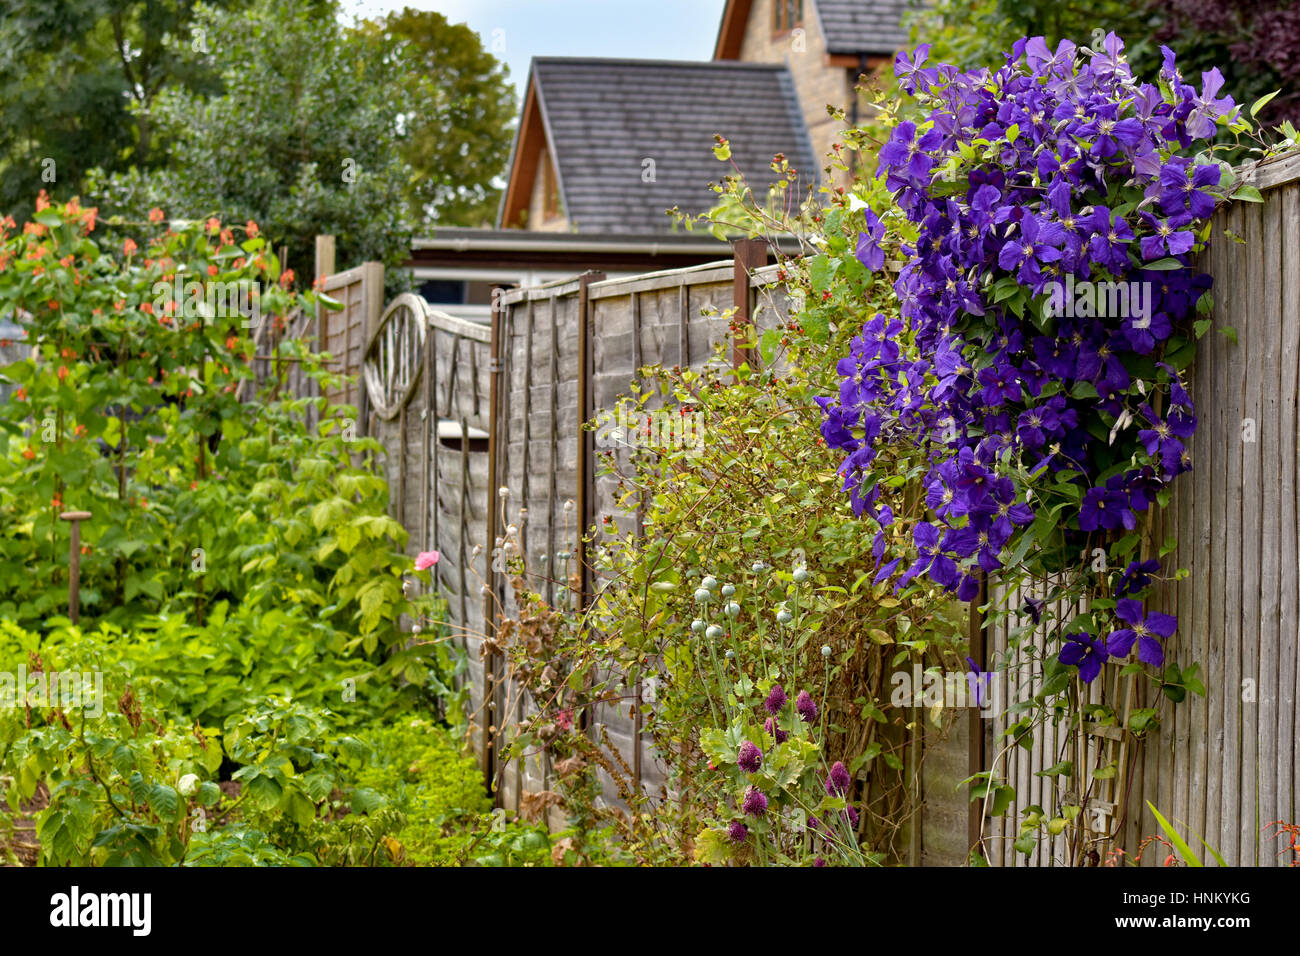 Overgrown garden in Bristol with clematis in the foreground and vegetable plants in the background Stock Photo